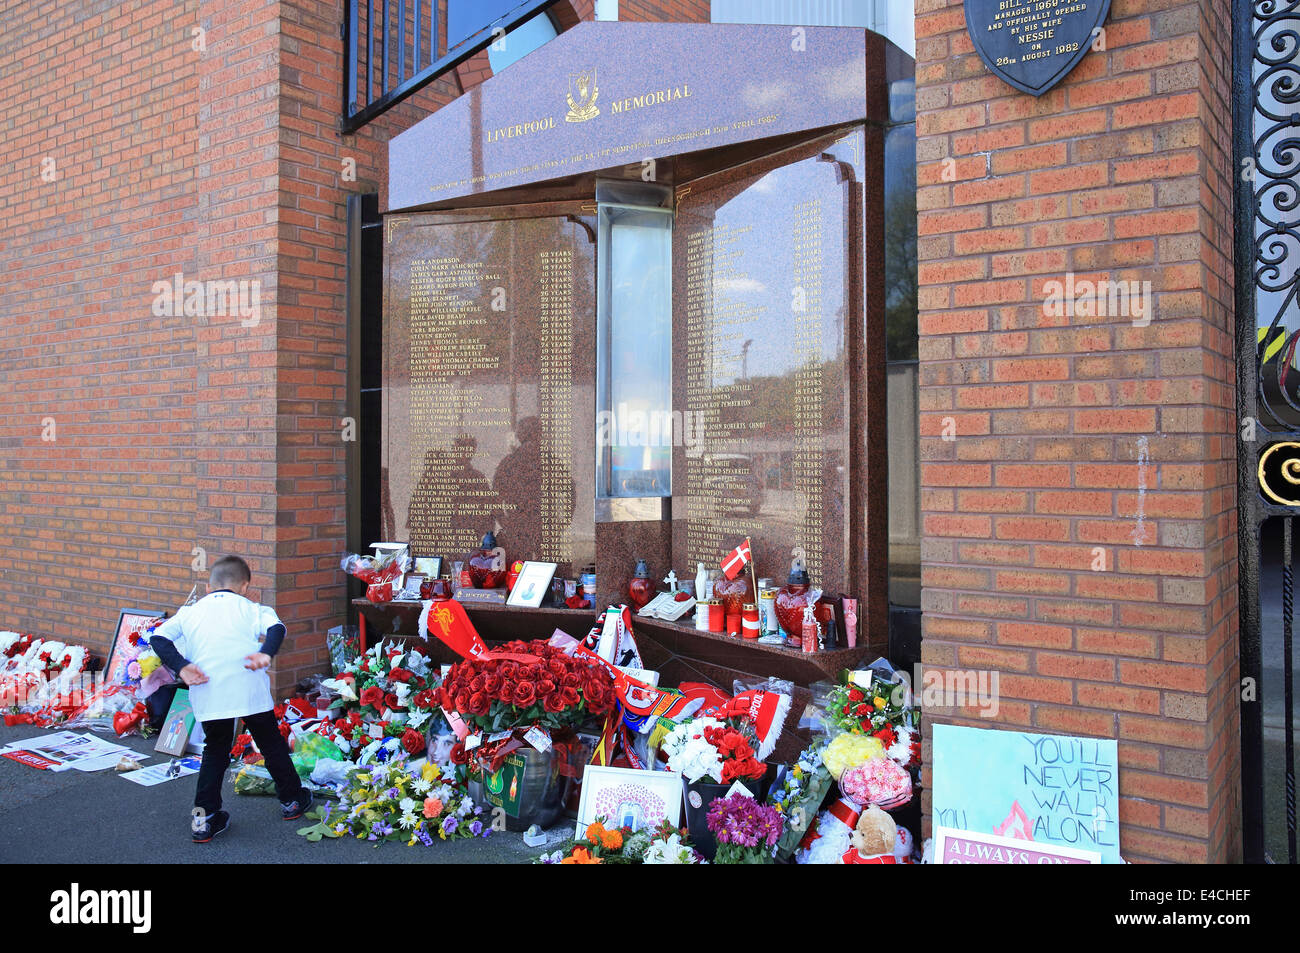 The Hillsborough Memorial at Anfield football stadium, commemorating those that died in the tragedy of 1989, Liverpool, UK Stock Photo